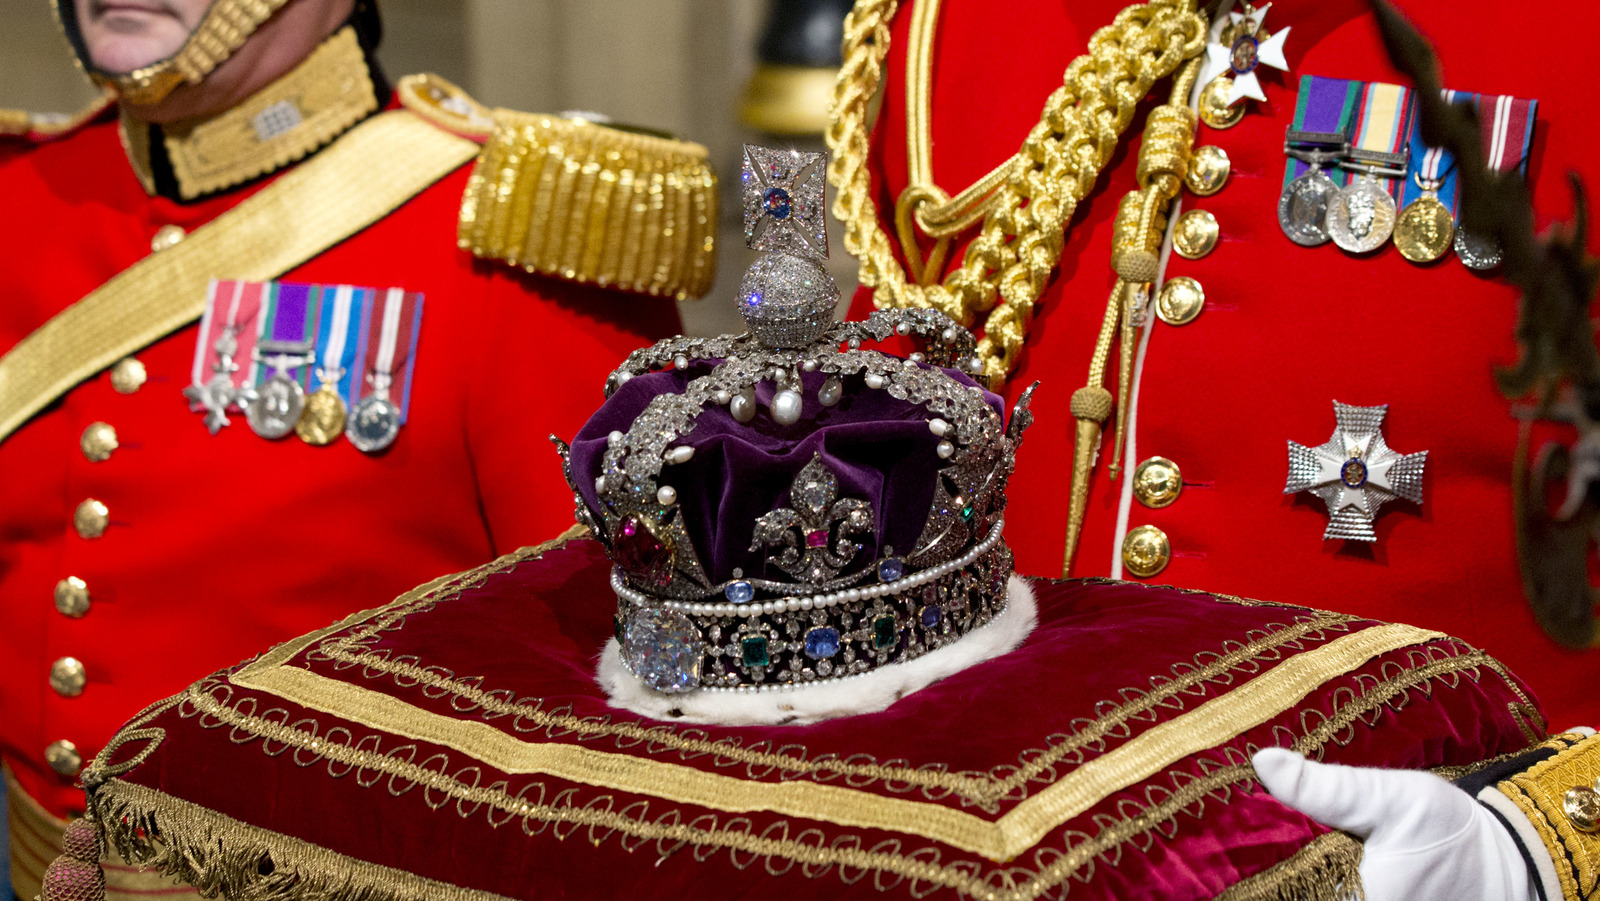 The Jewels of King Charles's Imperial State Crown - The Black Prince's Ruby